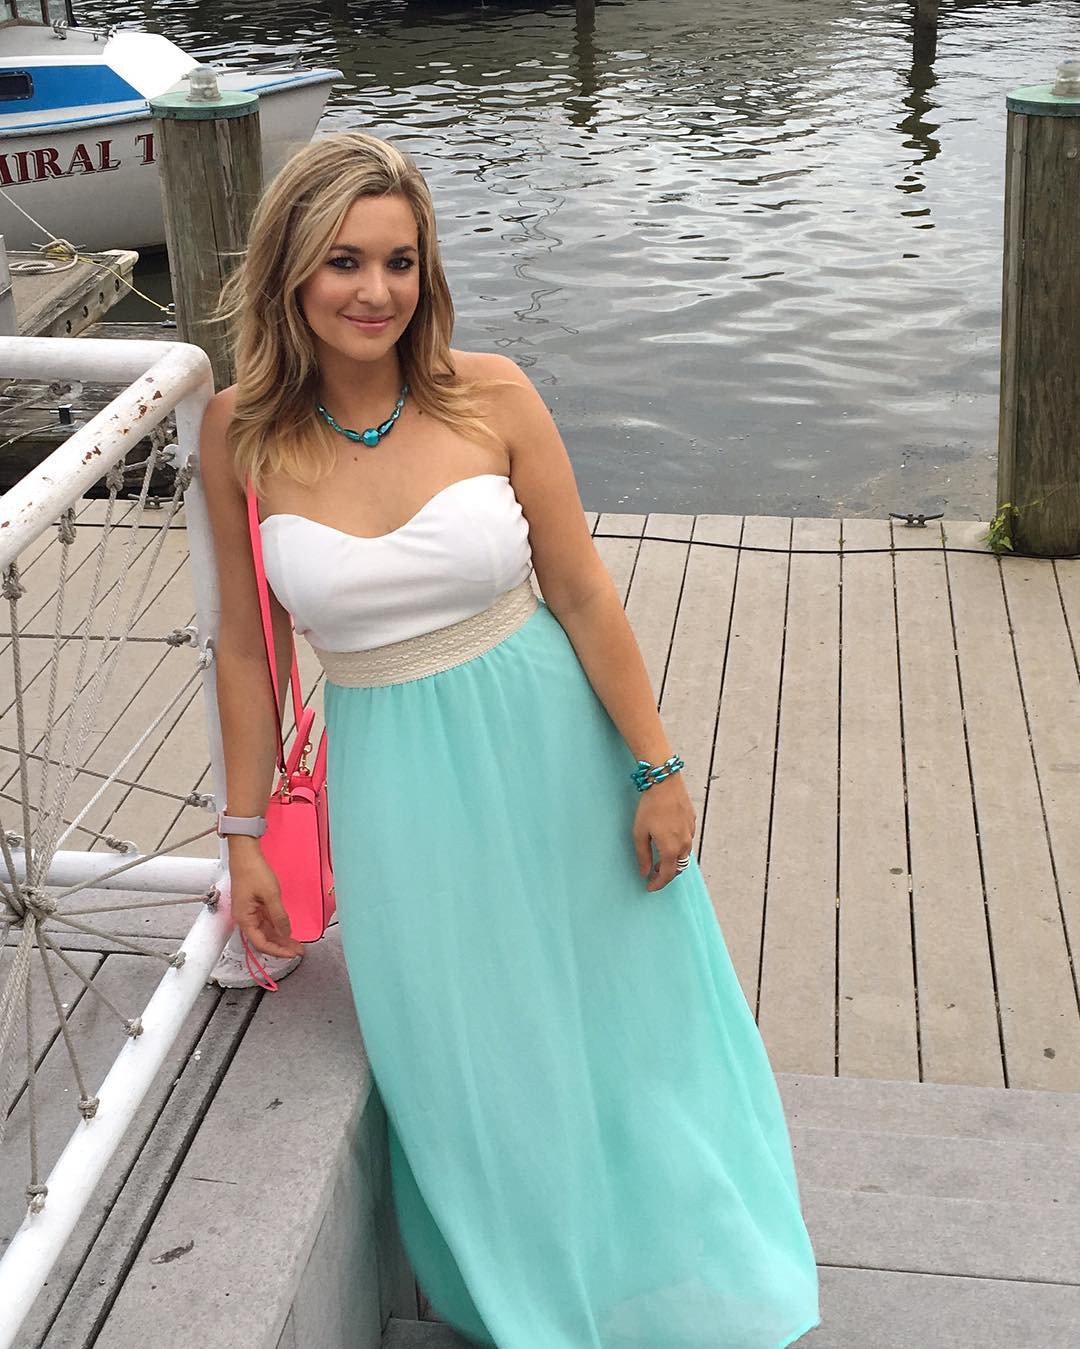 75+ Hot Pictures Of Katie Pavlich Will Make You Her Biggest Fan | Best Of Comic Books